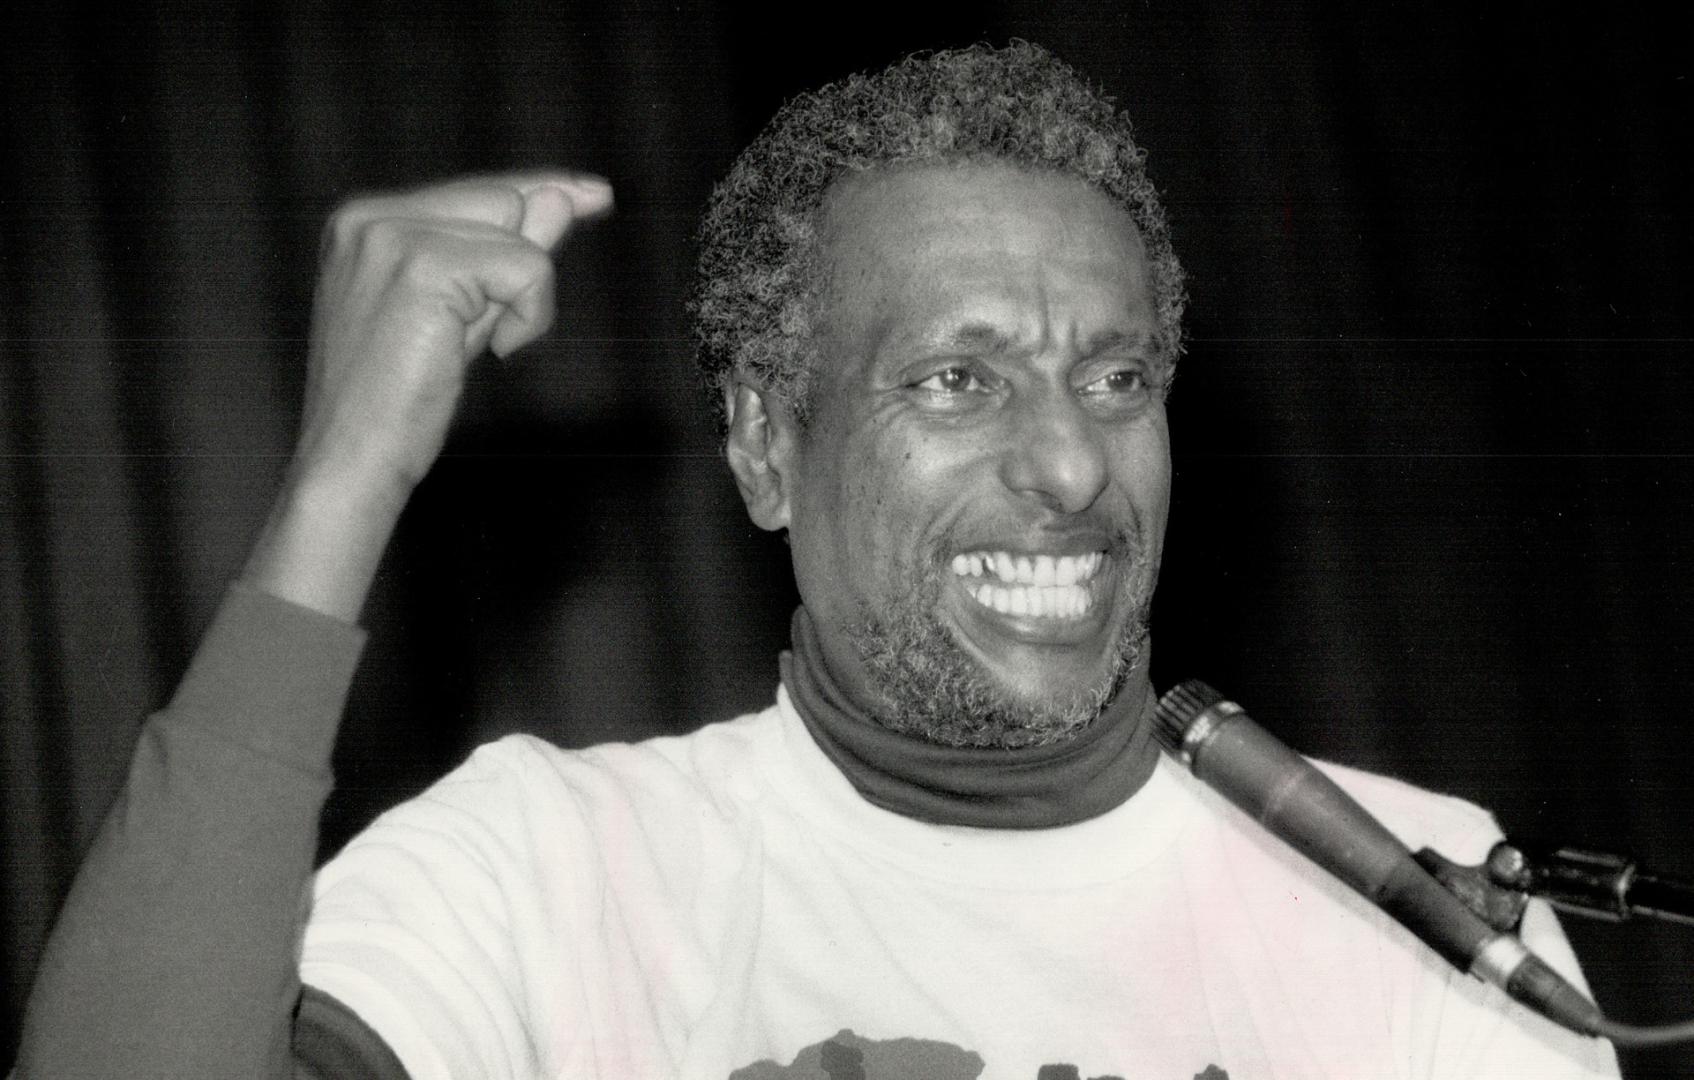 Kwame Ture (formerly Stockley Carmichael) speaks to crowd advocating that Africa belings to the Black Man